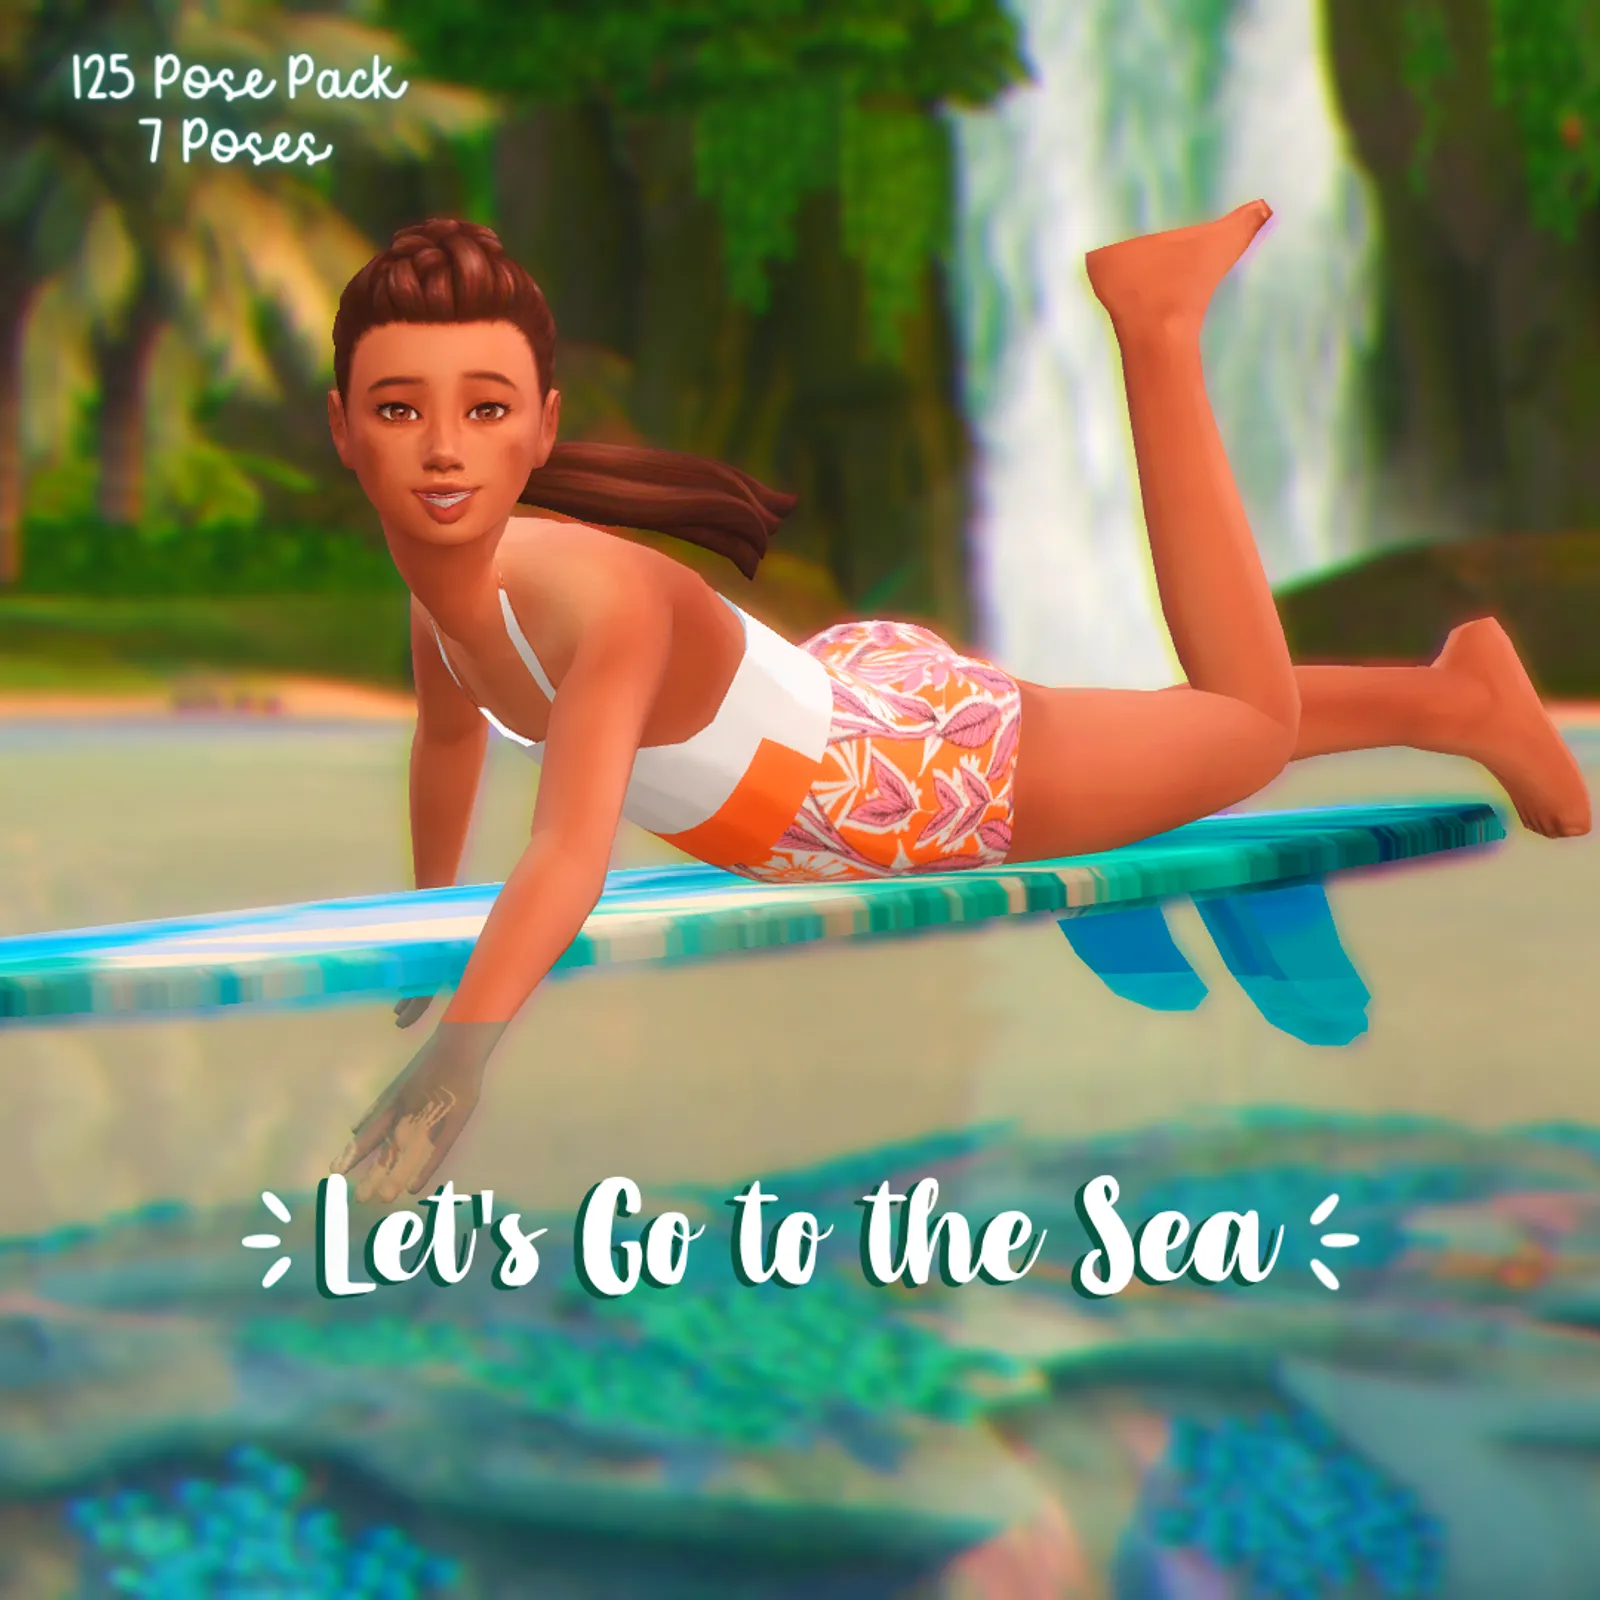 #125 Pose Pack - Let's Go To The Sea 